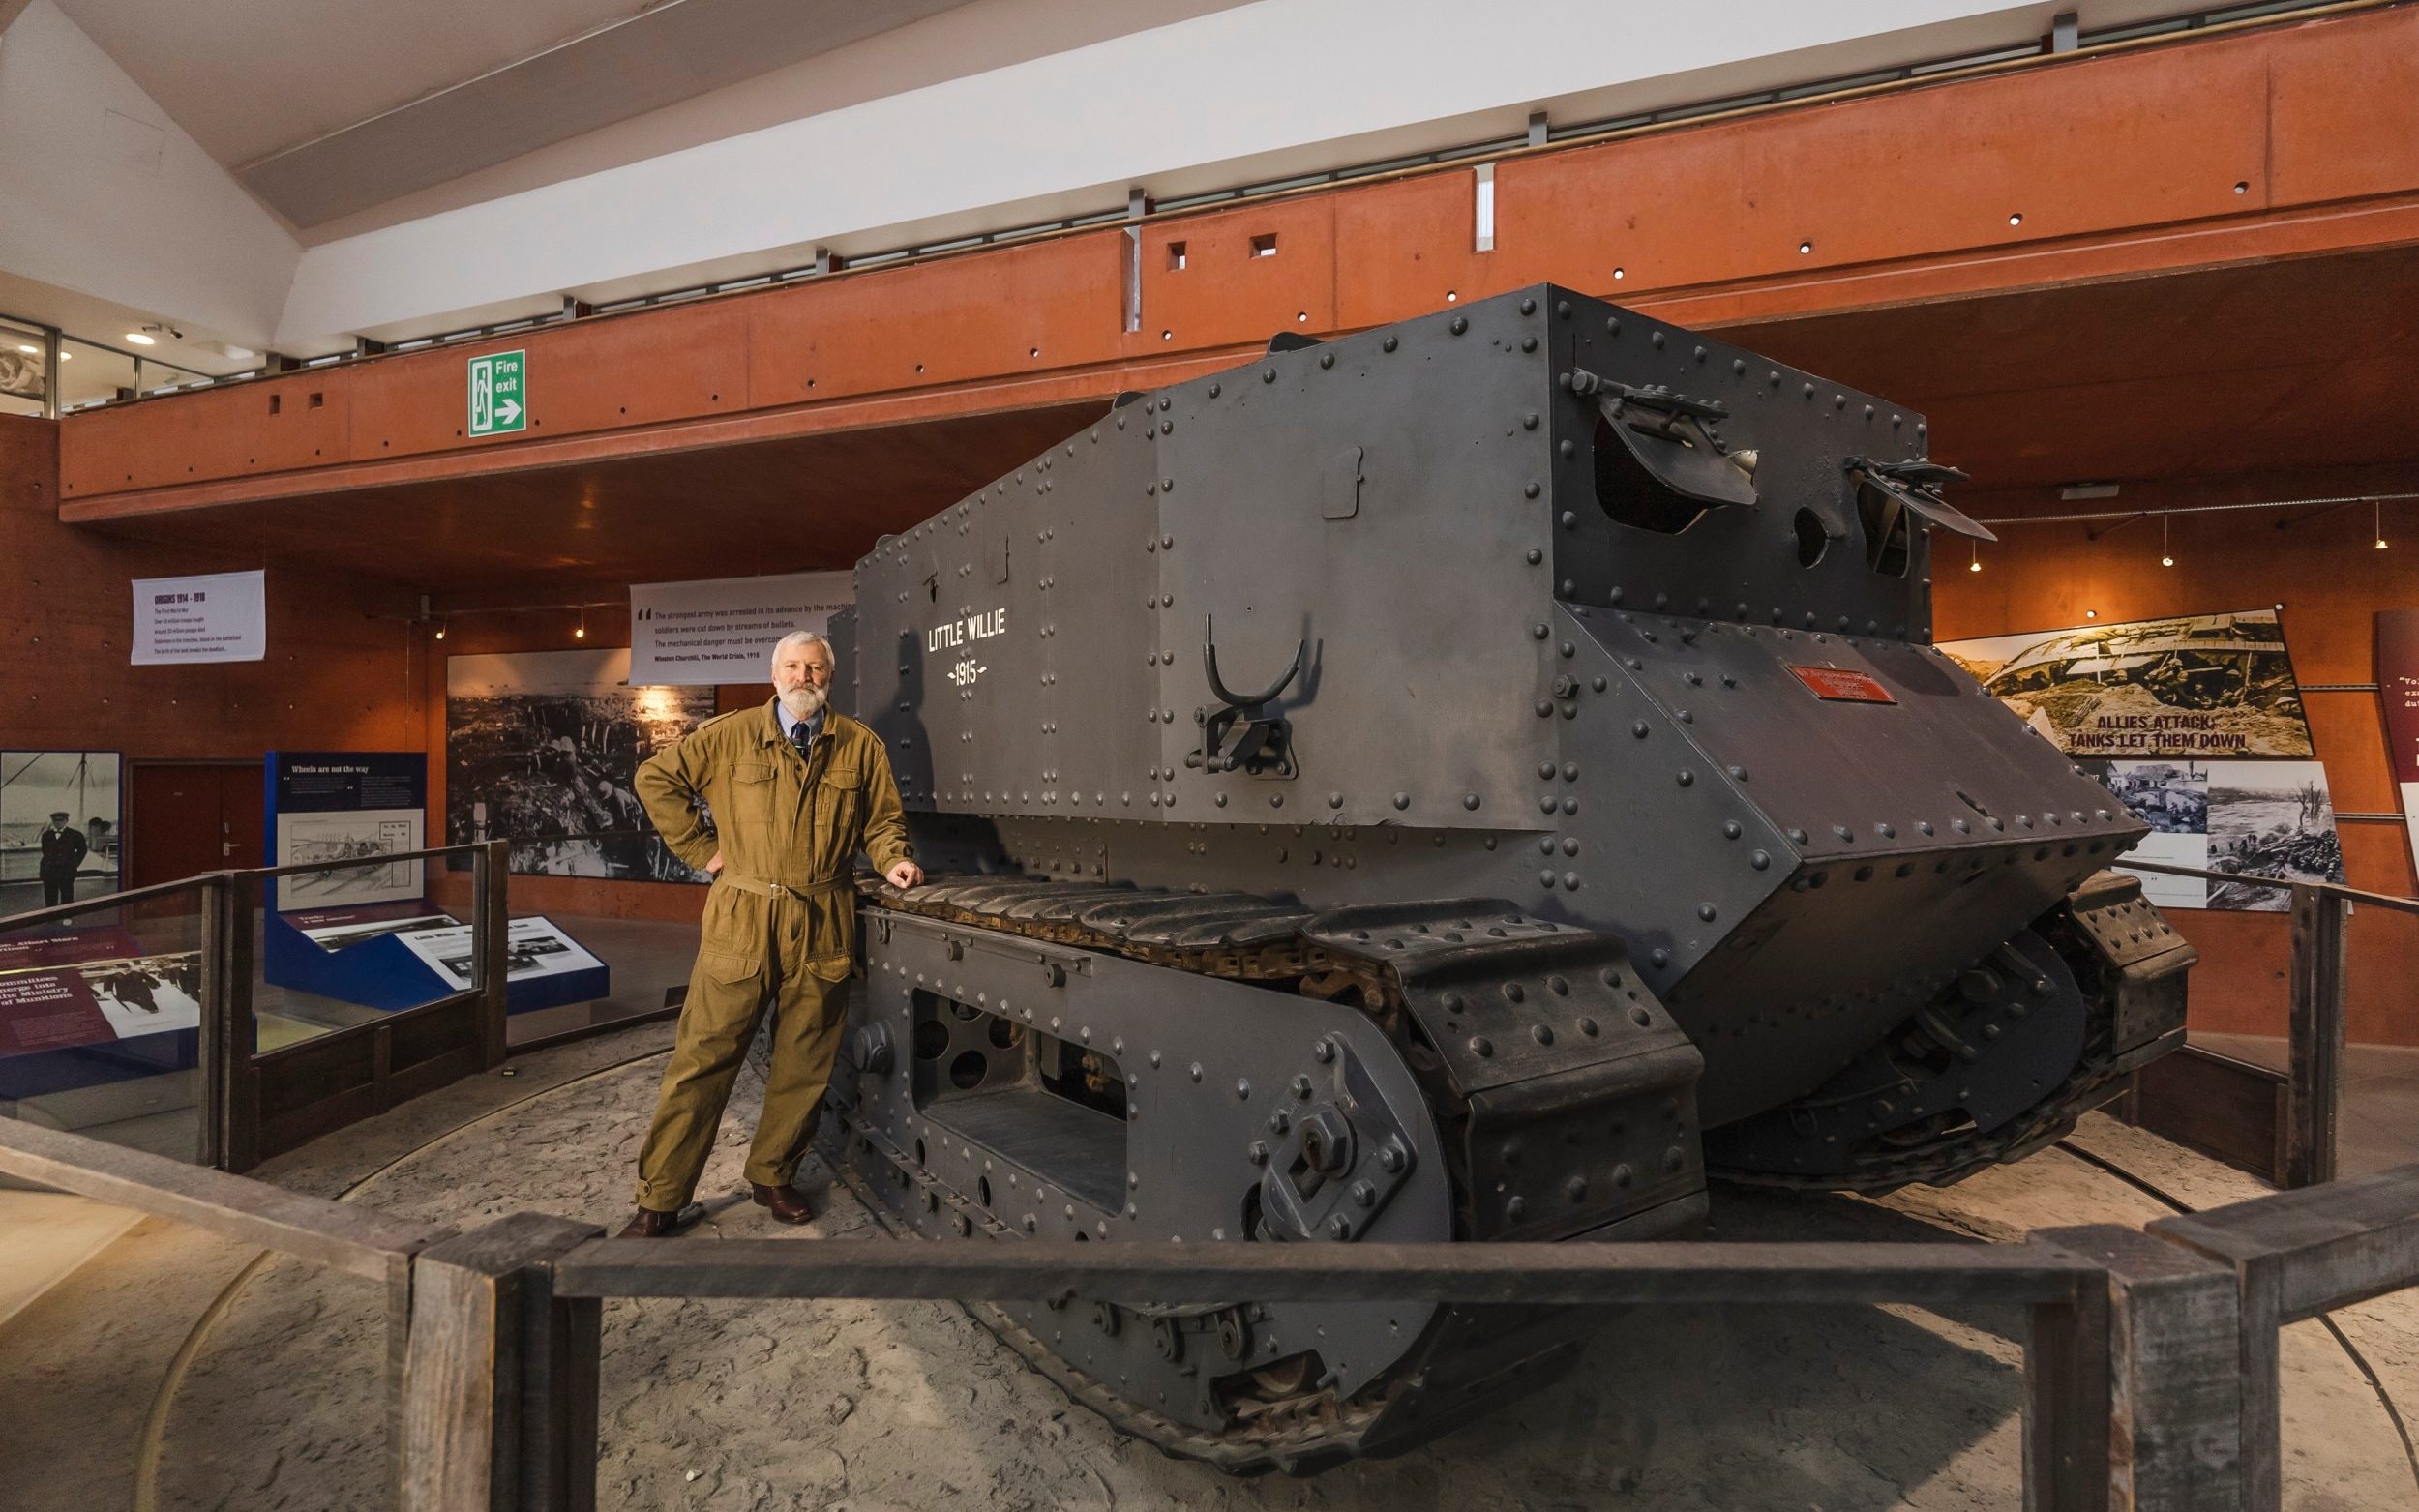 stolen medals of war hero who co-invented the tank found 50 years after theft